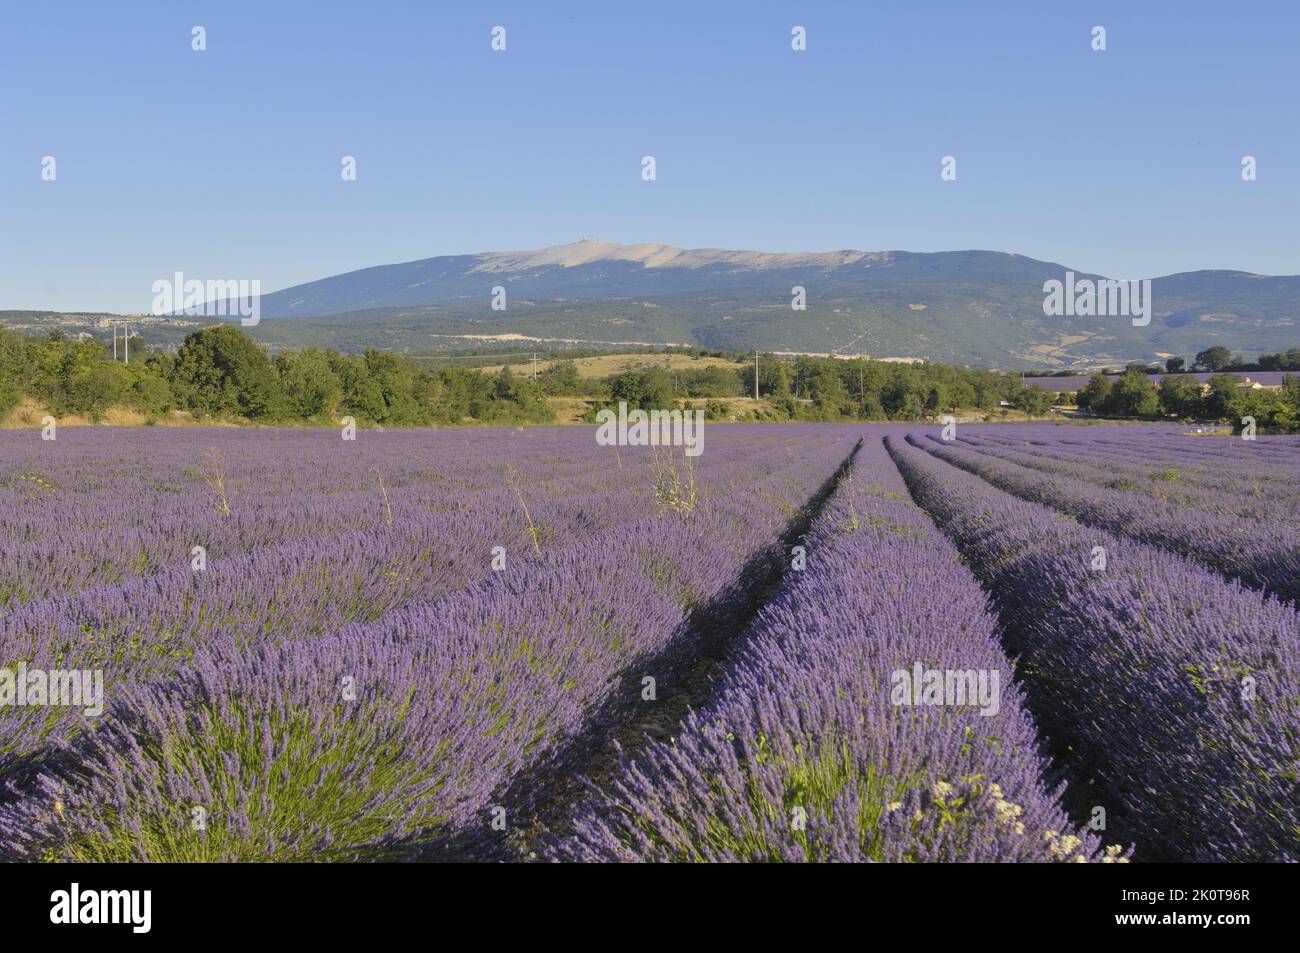 Lavender (Lavandula sp) field of flowers to be harvested with the Mont Ventoux in the background - Sault area - Provence - Vaucluse - France Stock Photo